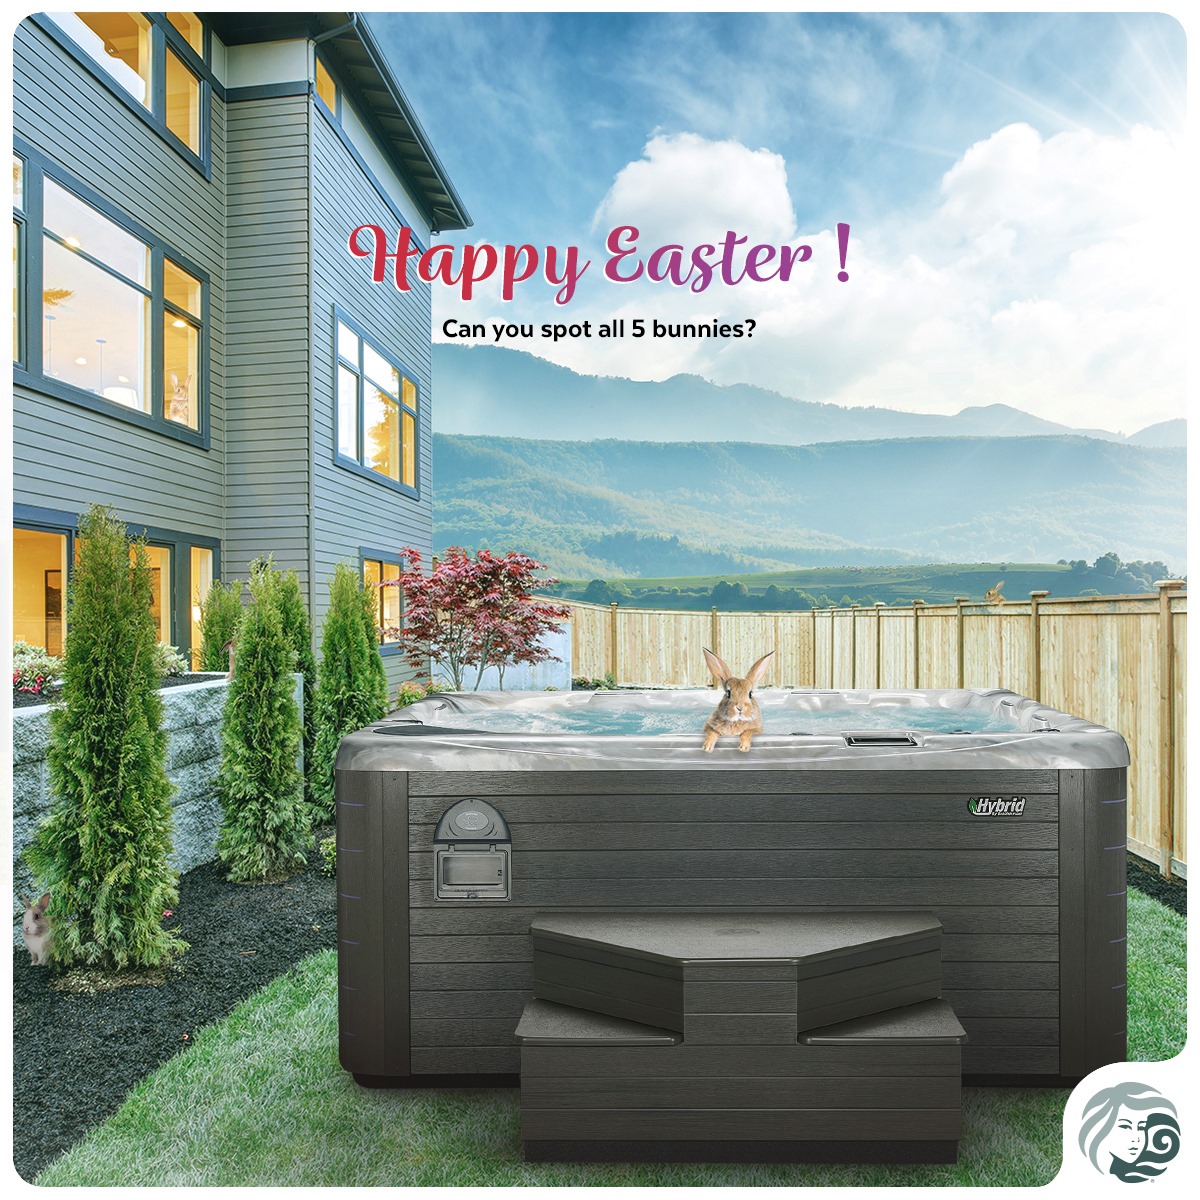 Happy Easter from the Beachcomber family to yours.🐰🌻 We hope everyone has a lovely and safe day spent with loved ones!  #HappyEaster #BeachcomberFamily #FamilyGathering #Beachcomberyeg